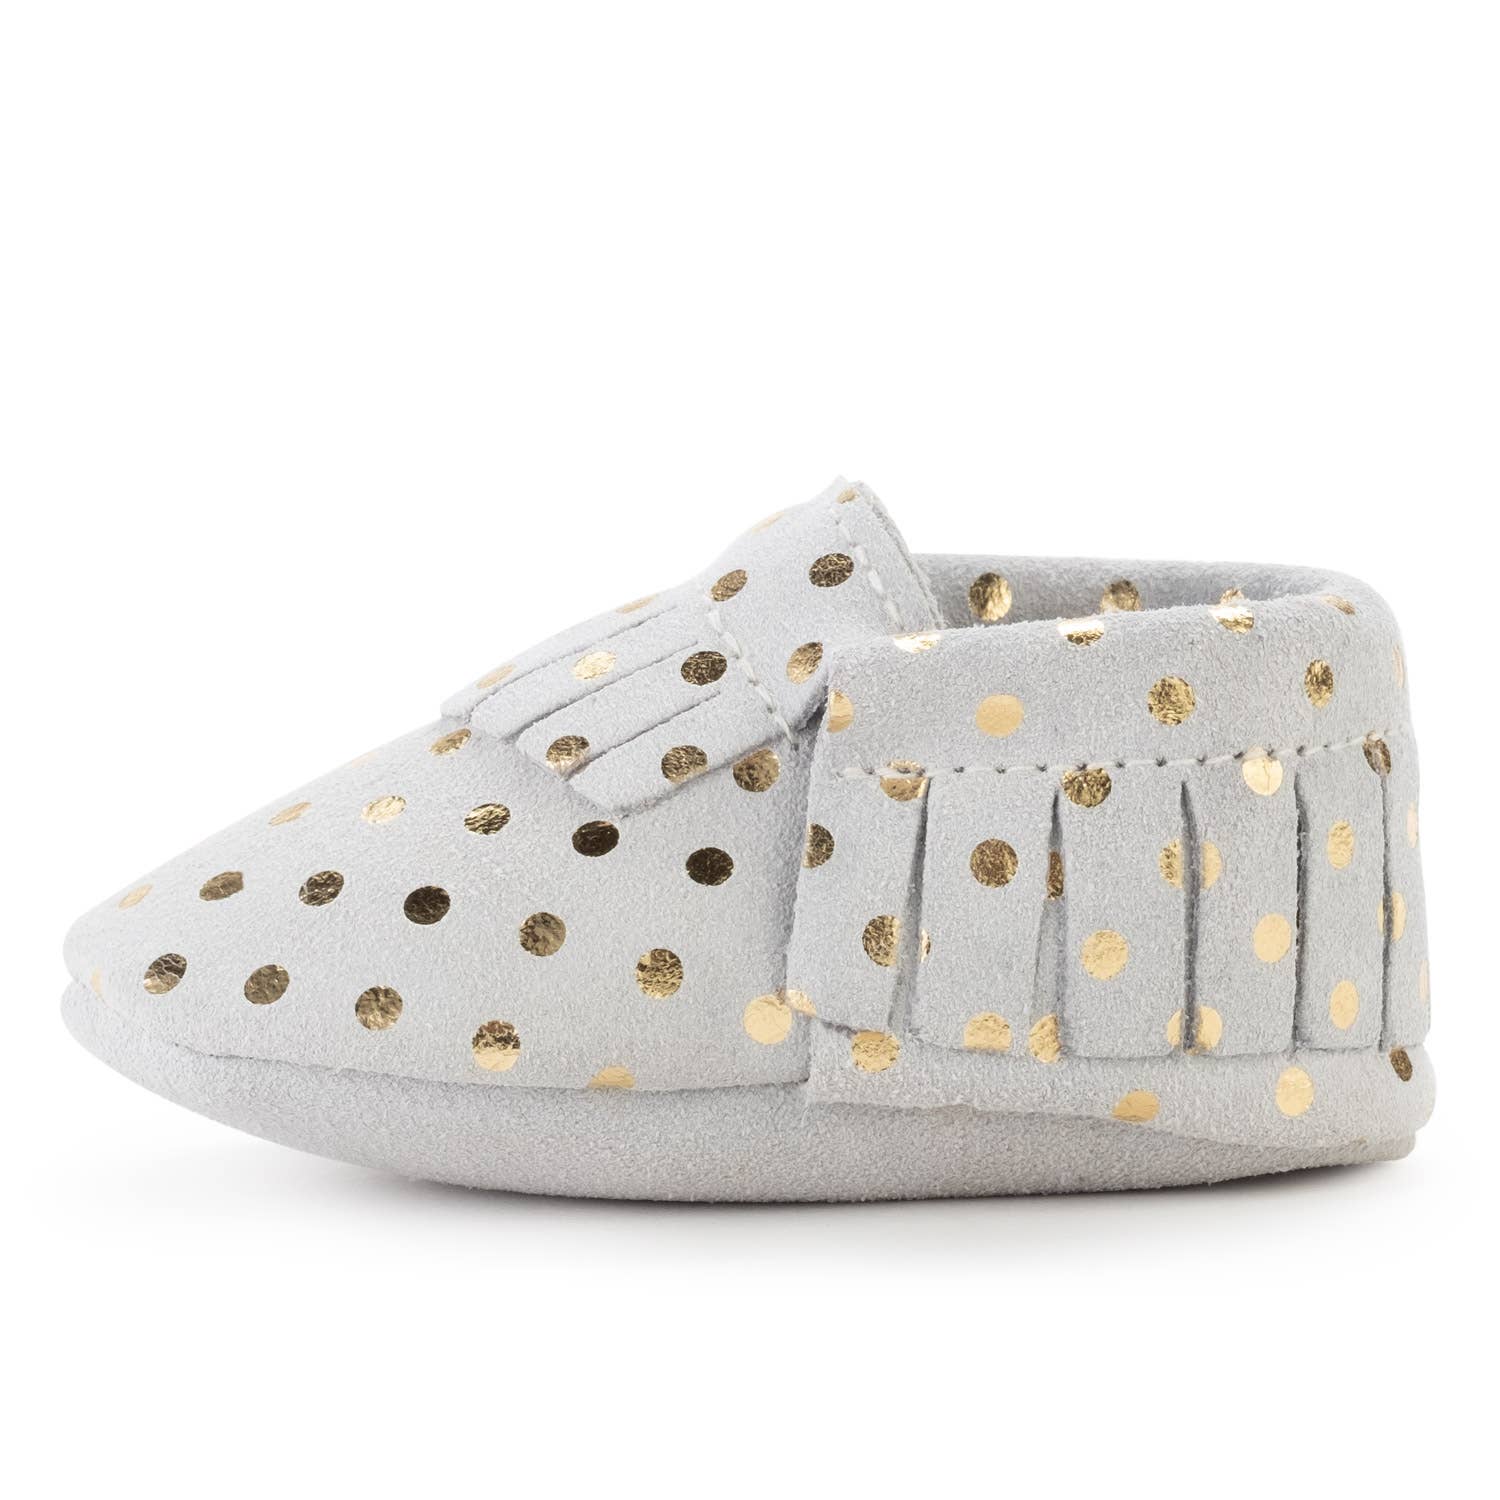 Baby Moccasins - Genuine Leather Baby Shoes (Champagne)